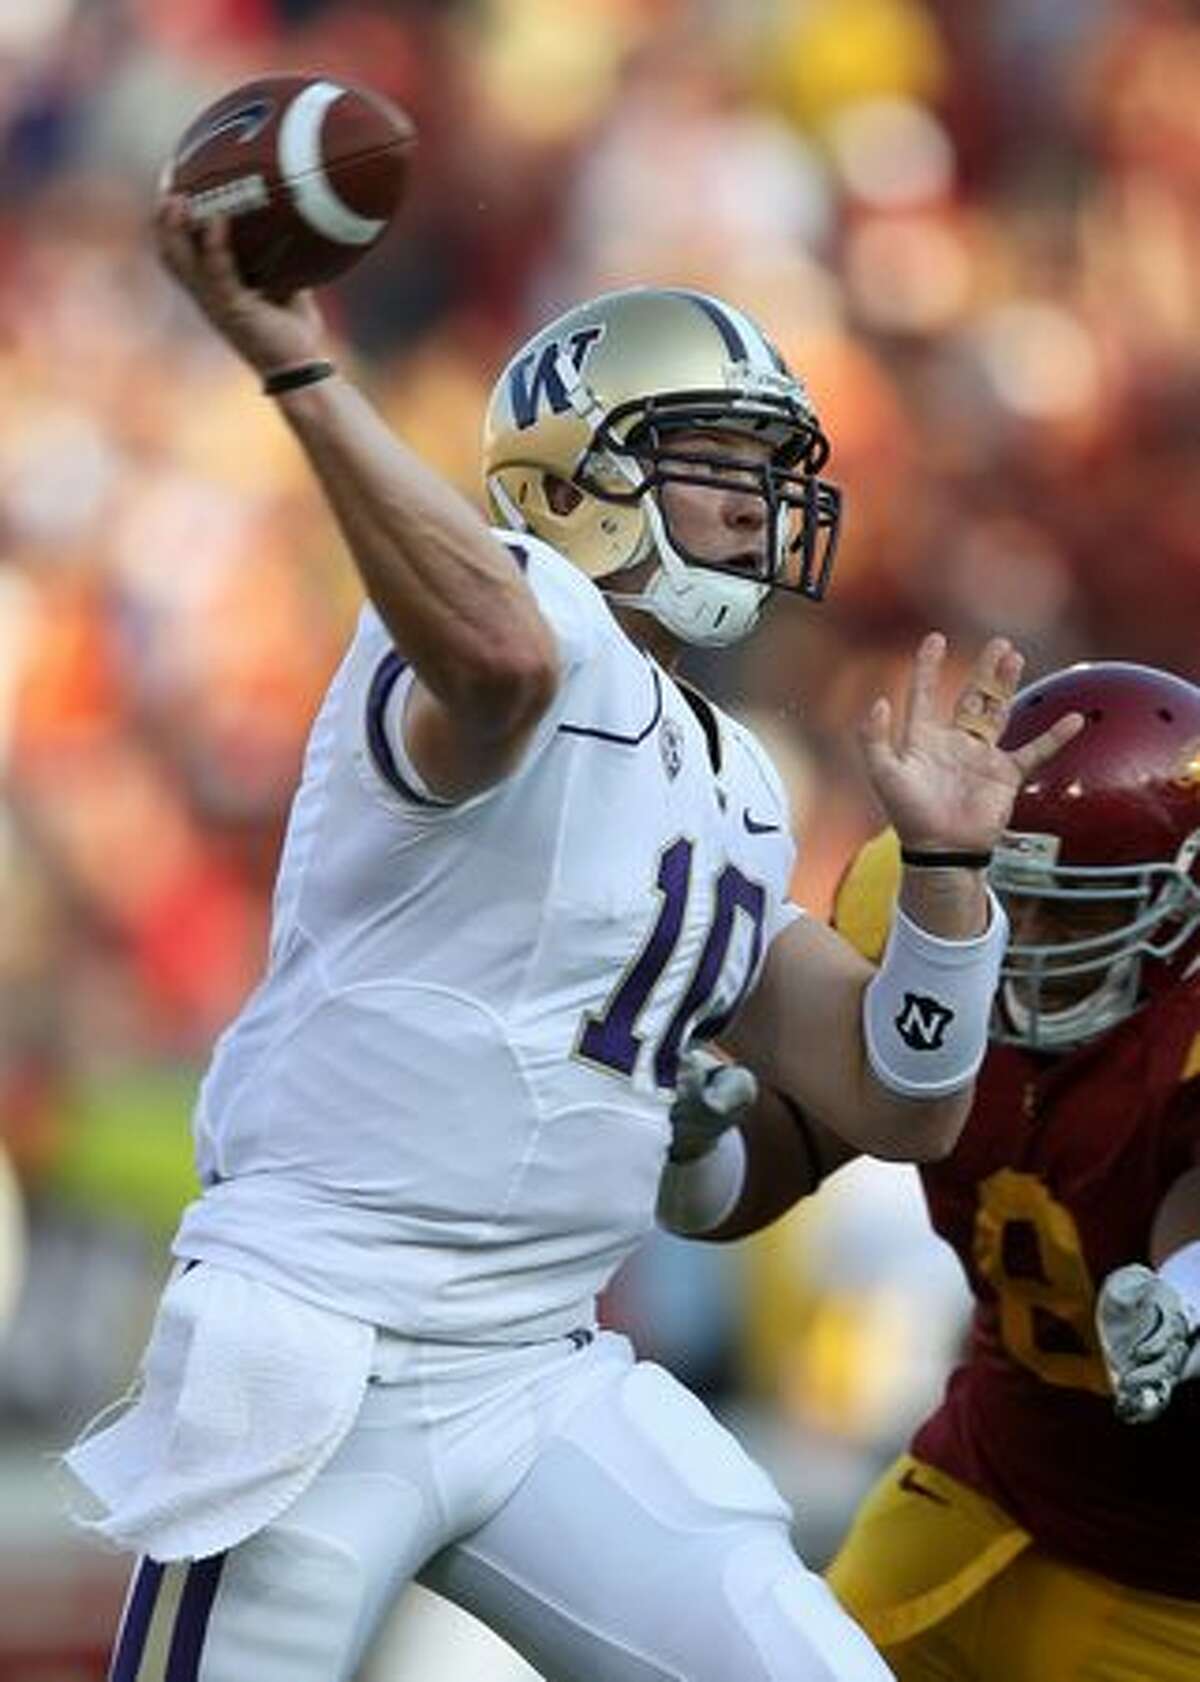 Quarterback Jake Locker #10 of the Washington Huskies throws a pass against the USC Trojans at the Los Angeles Memorial Coliseum on October 2, 2010 in Los Angeles, California.